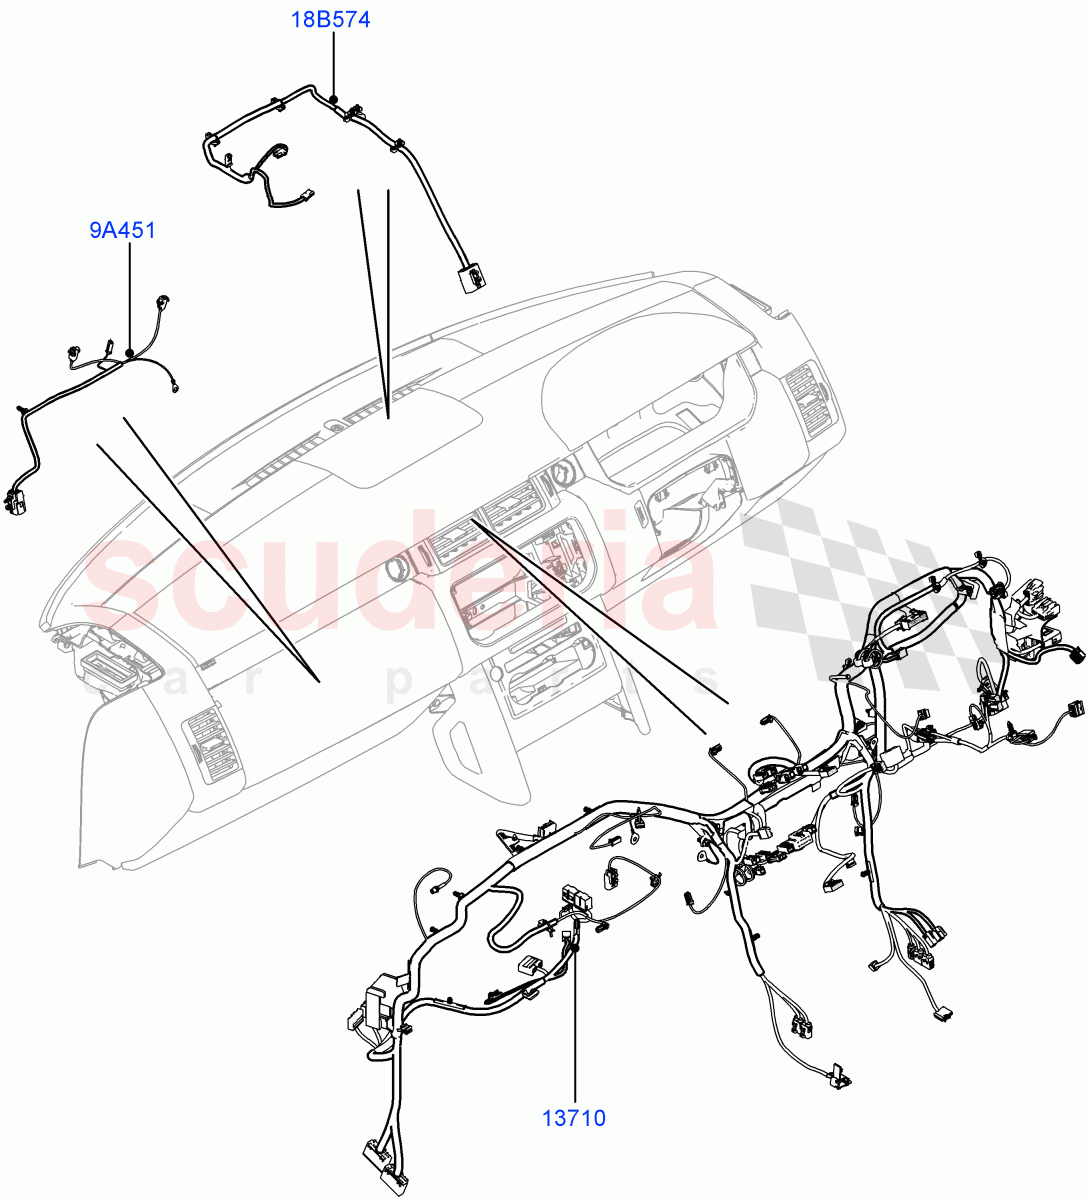 Electrical Wiring - Engine And Dash(Facia)(3.0 V6 Diesel Electric Hybrid Eng)((V)FROMFA000001,(V)TOFA999999) of Land Rover Land Rover Range Rover (2012-2021) [3.0 I6 Turbo Petrol AJ20P6]